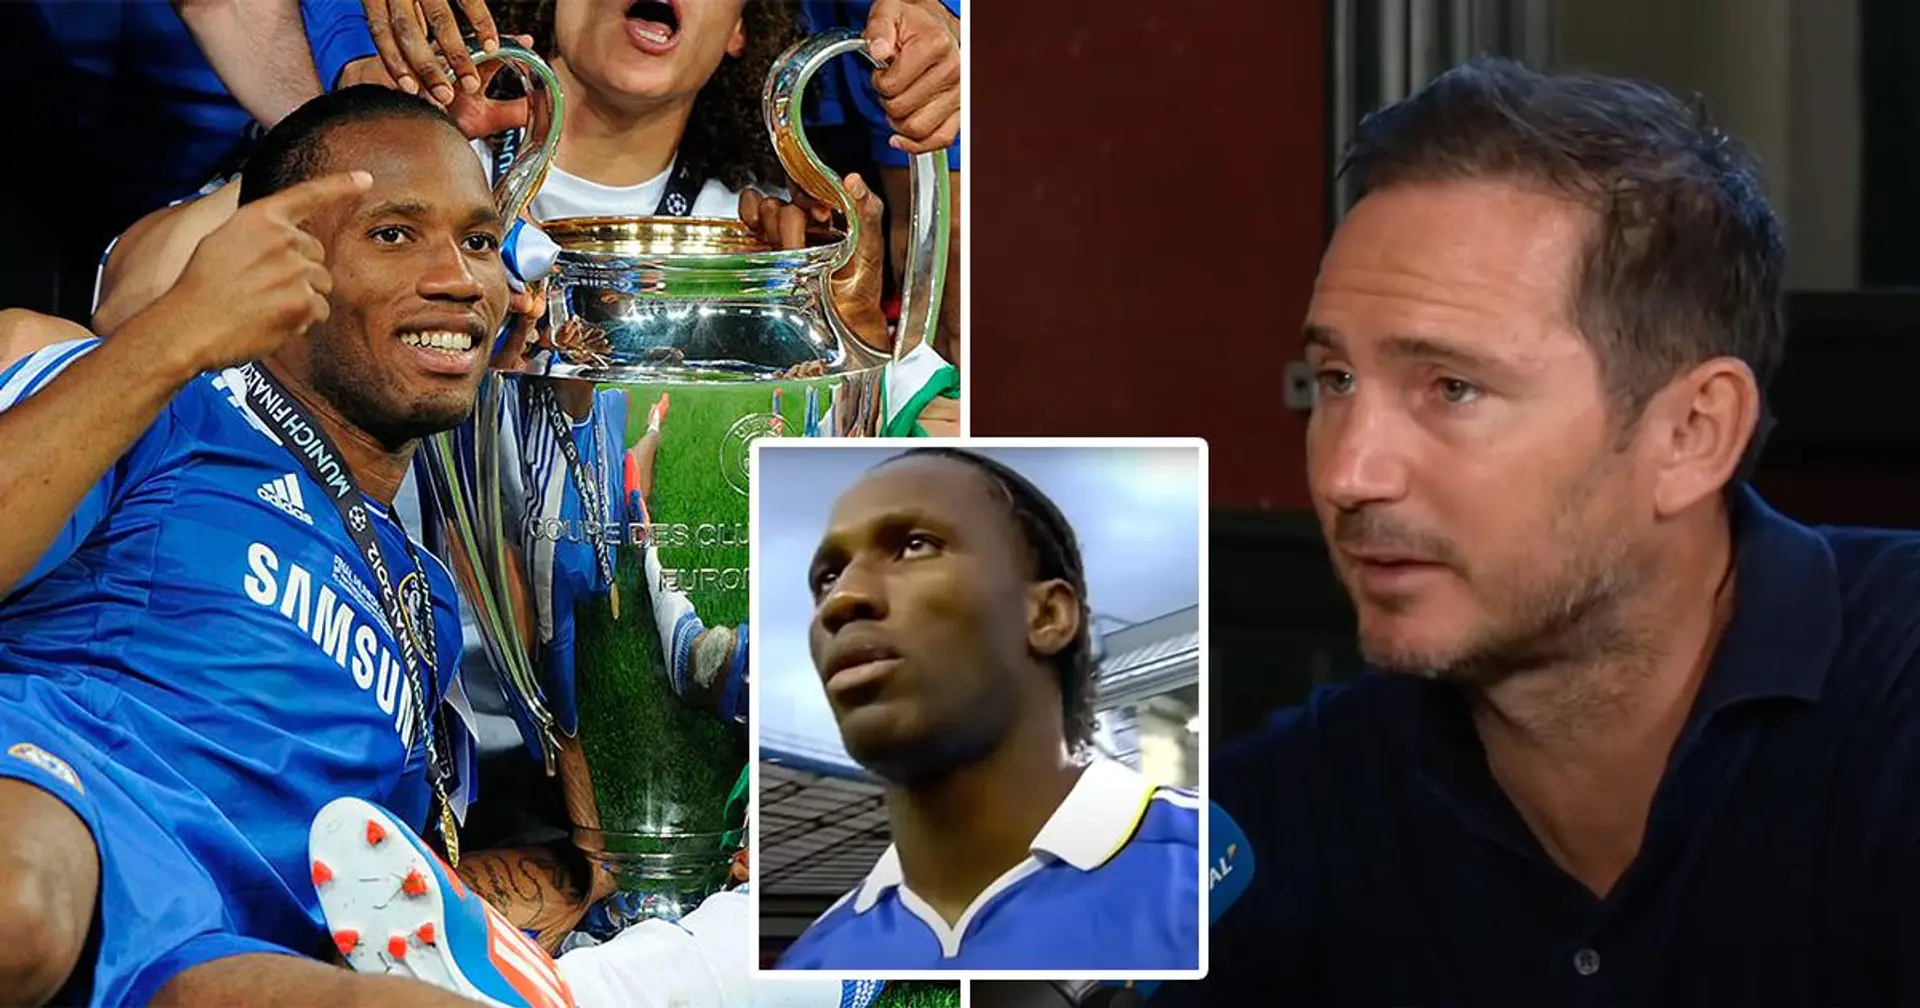 'He was headbutting walls before Champions League final': Lampard tells about Drogba's warming-up routine